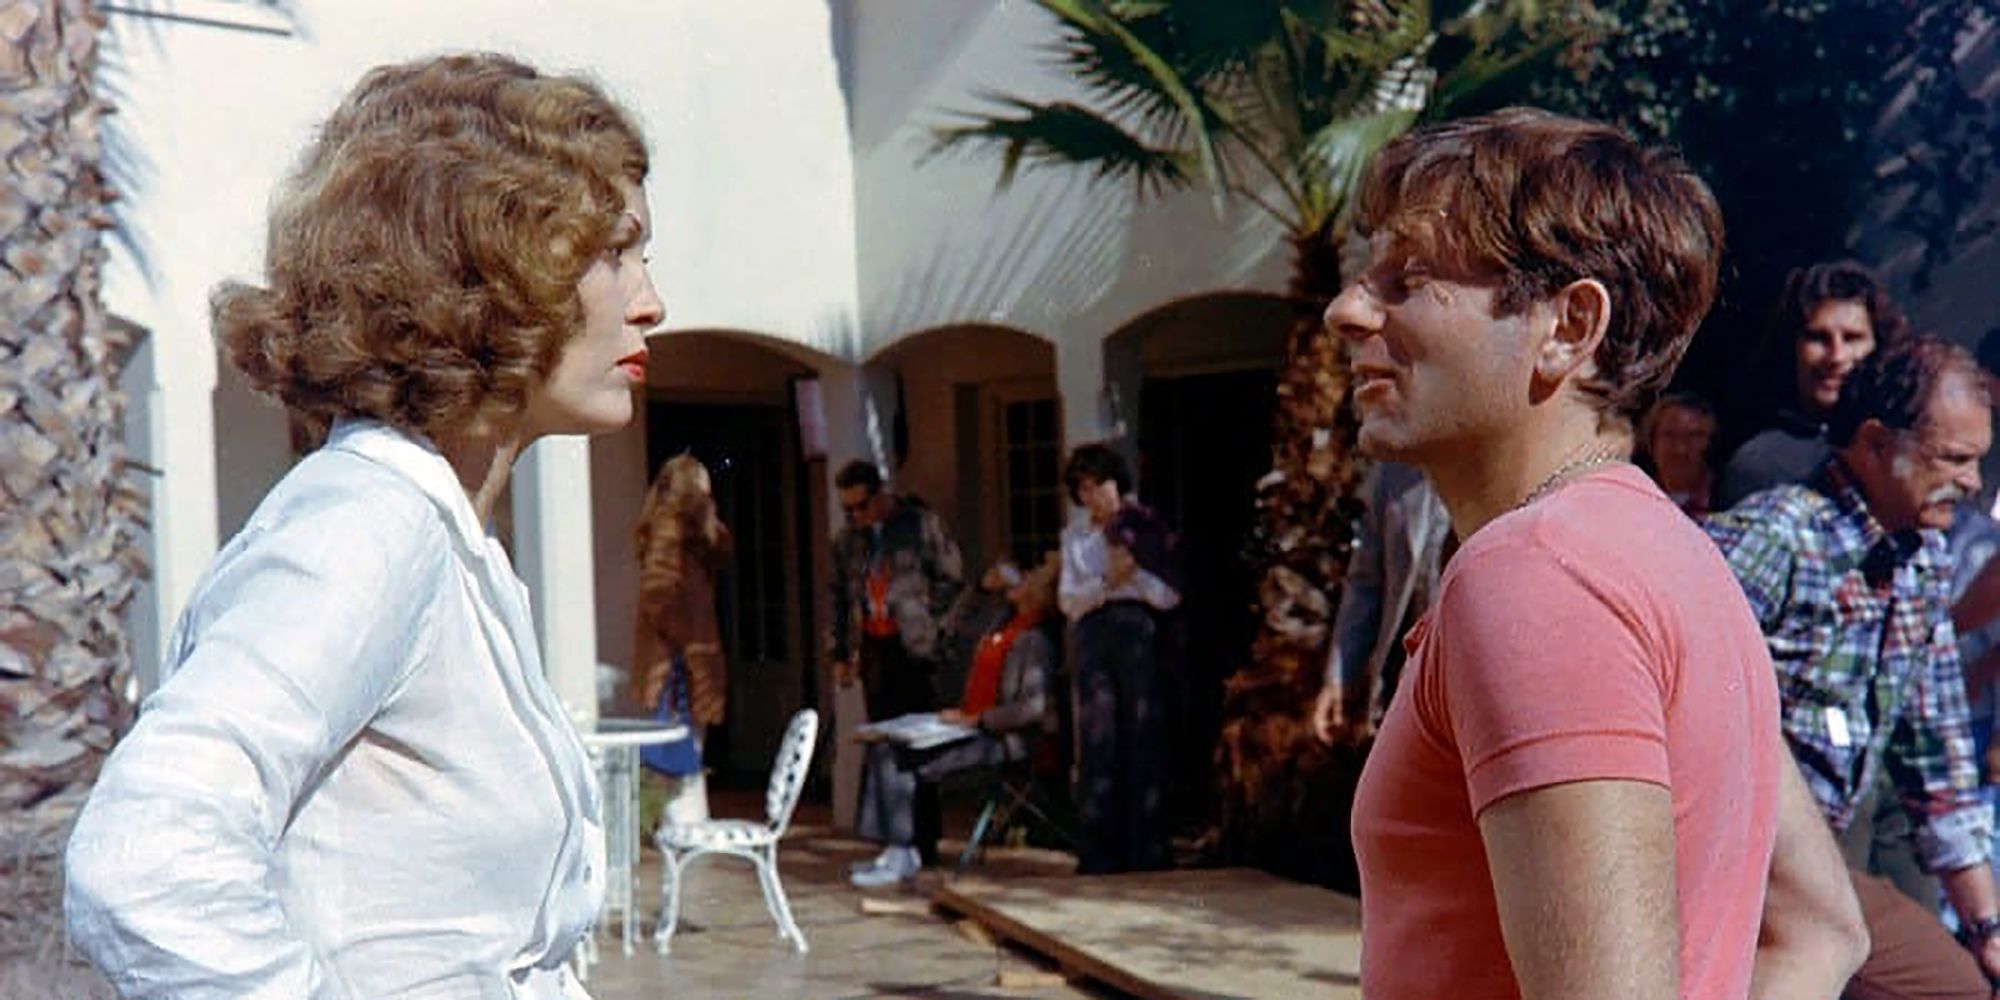 Faye Dunaway and director Roman Polanski famously butted heads while filming Chinatown